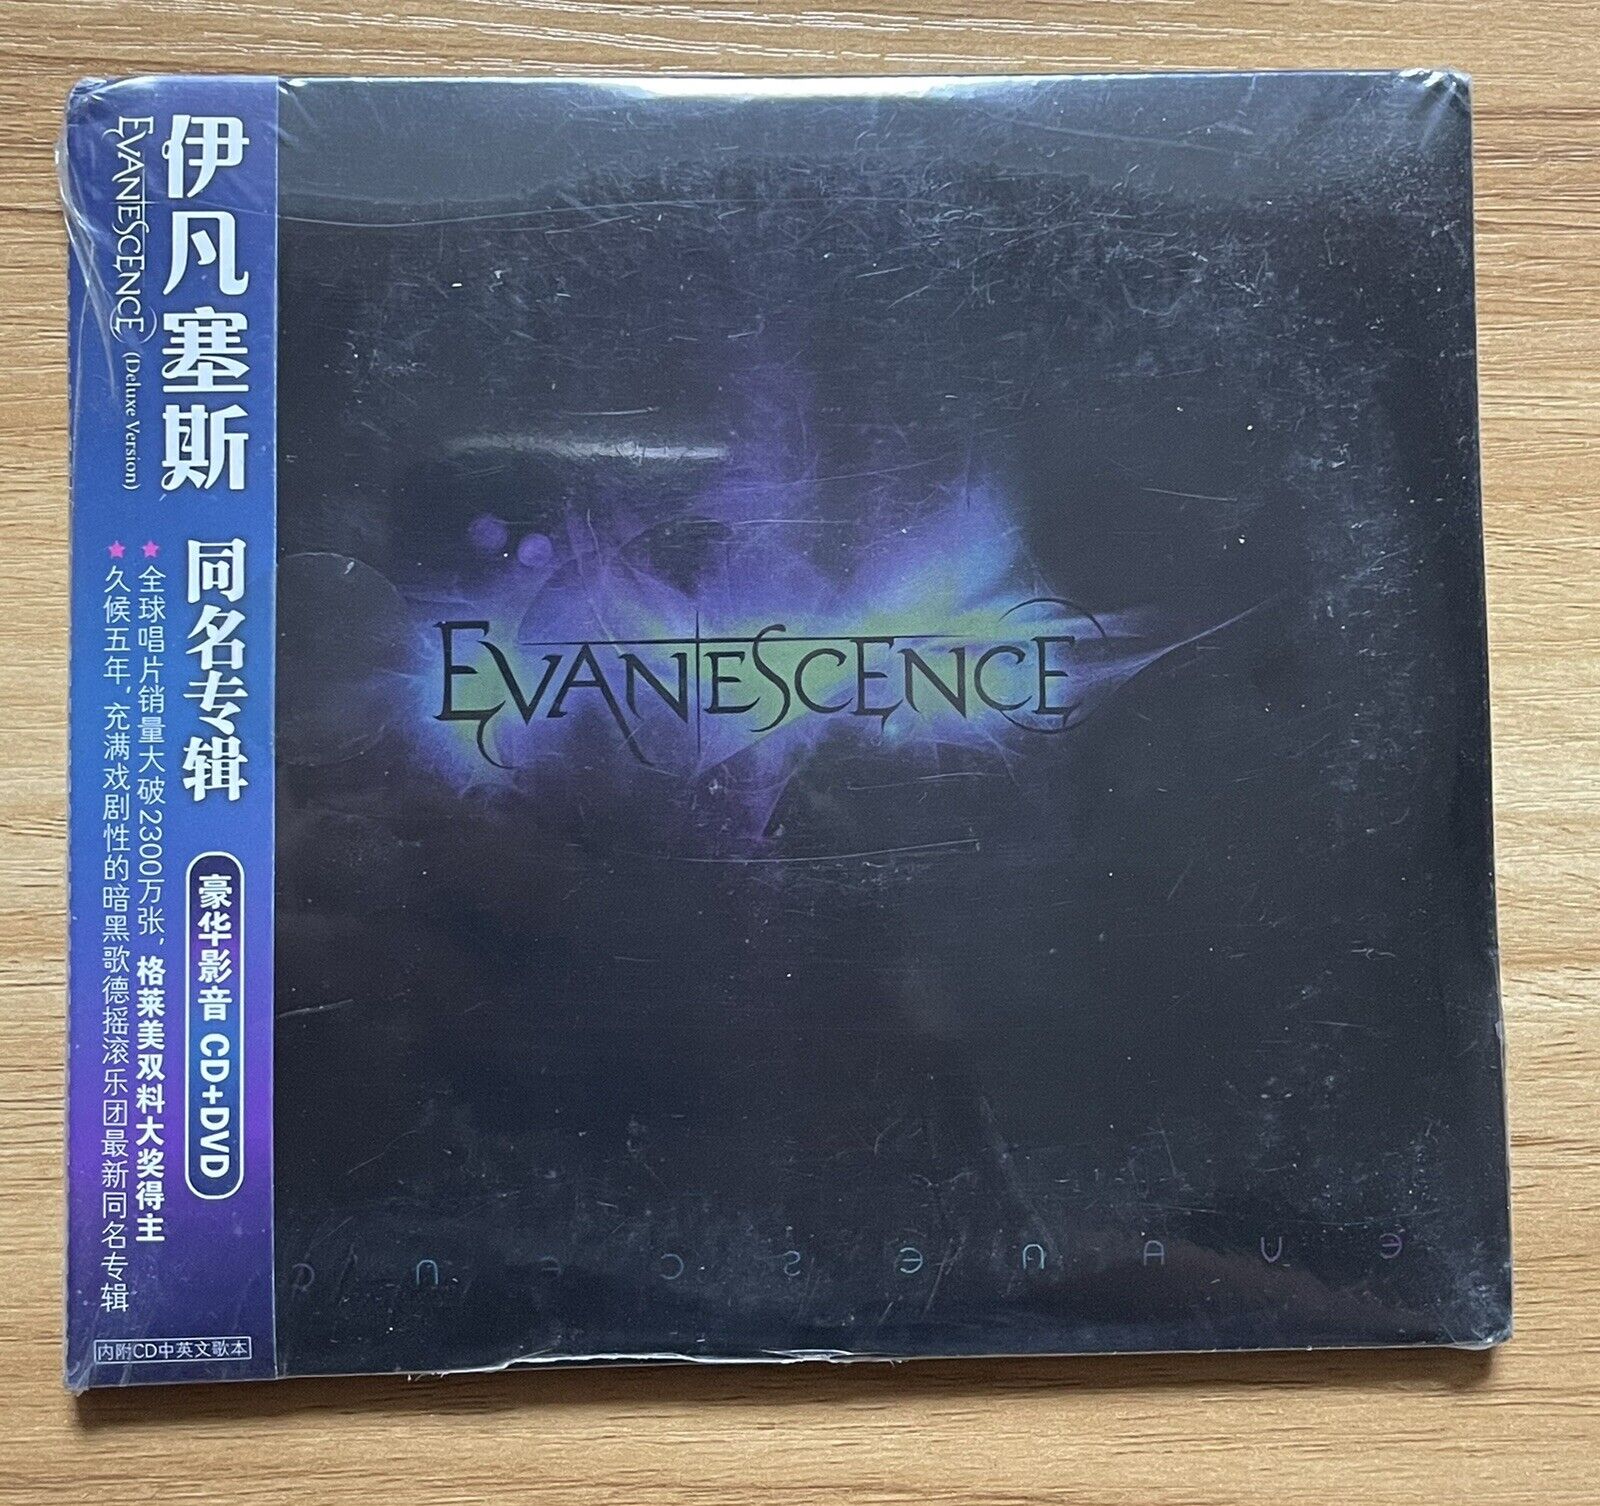 Evanescence China 1st Press CD + DVD Deluxe Edition Sealed Very Rare